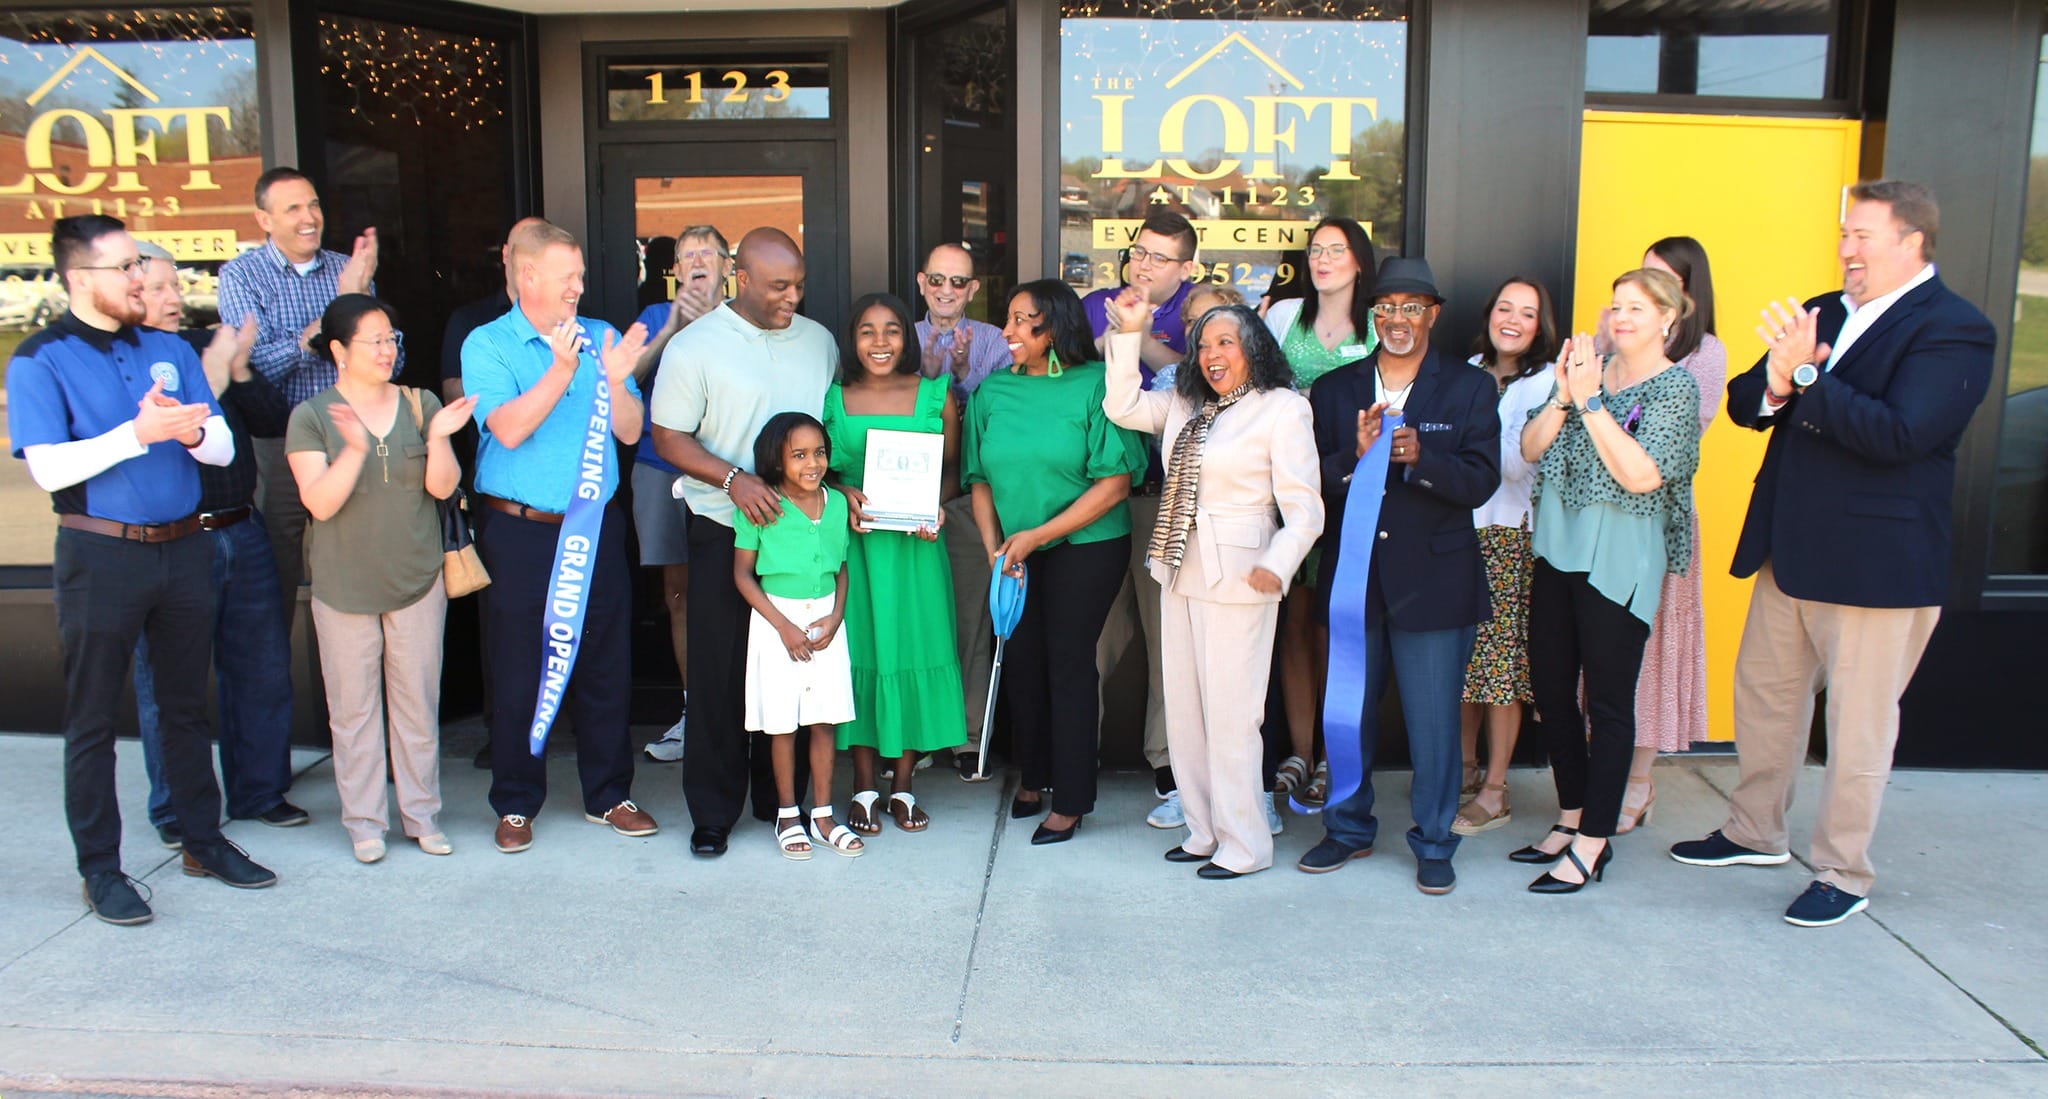 City of Princeton and PEDA officials at the ribbon-cutting ceremony for The Loft Event Center on Mercer Street.